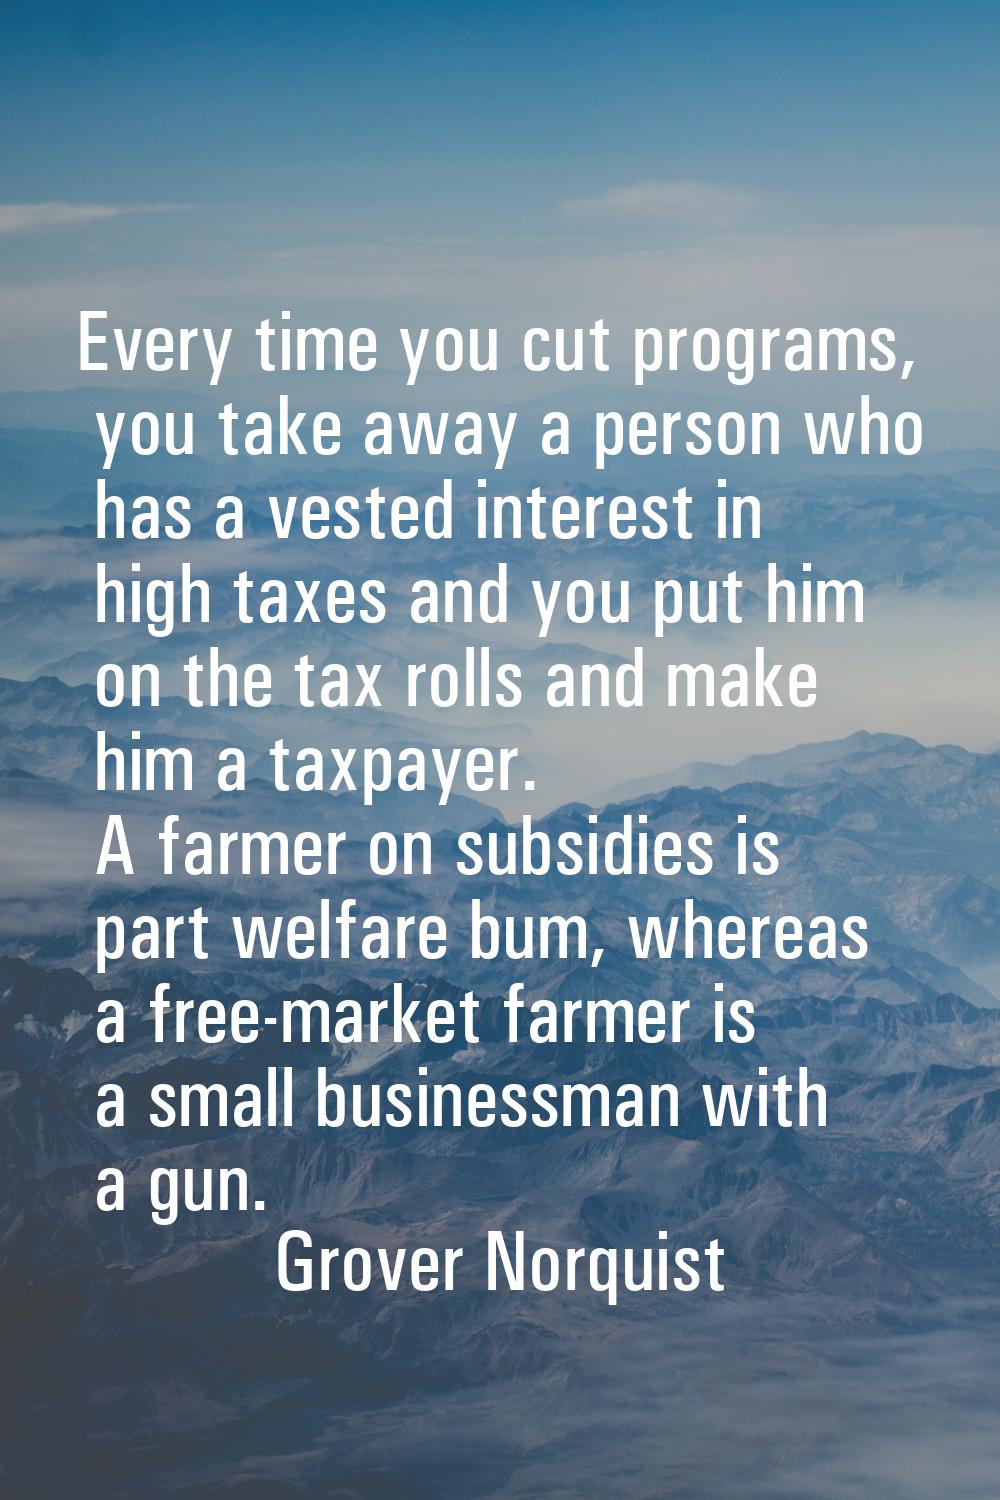 Every time you cut programs, you take away a person who has a vested interest in high taxes and you